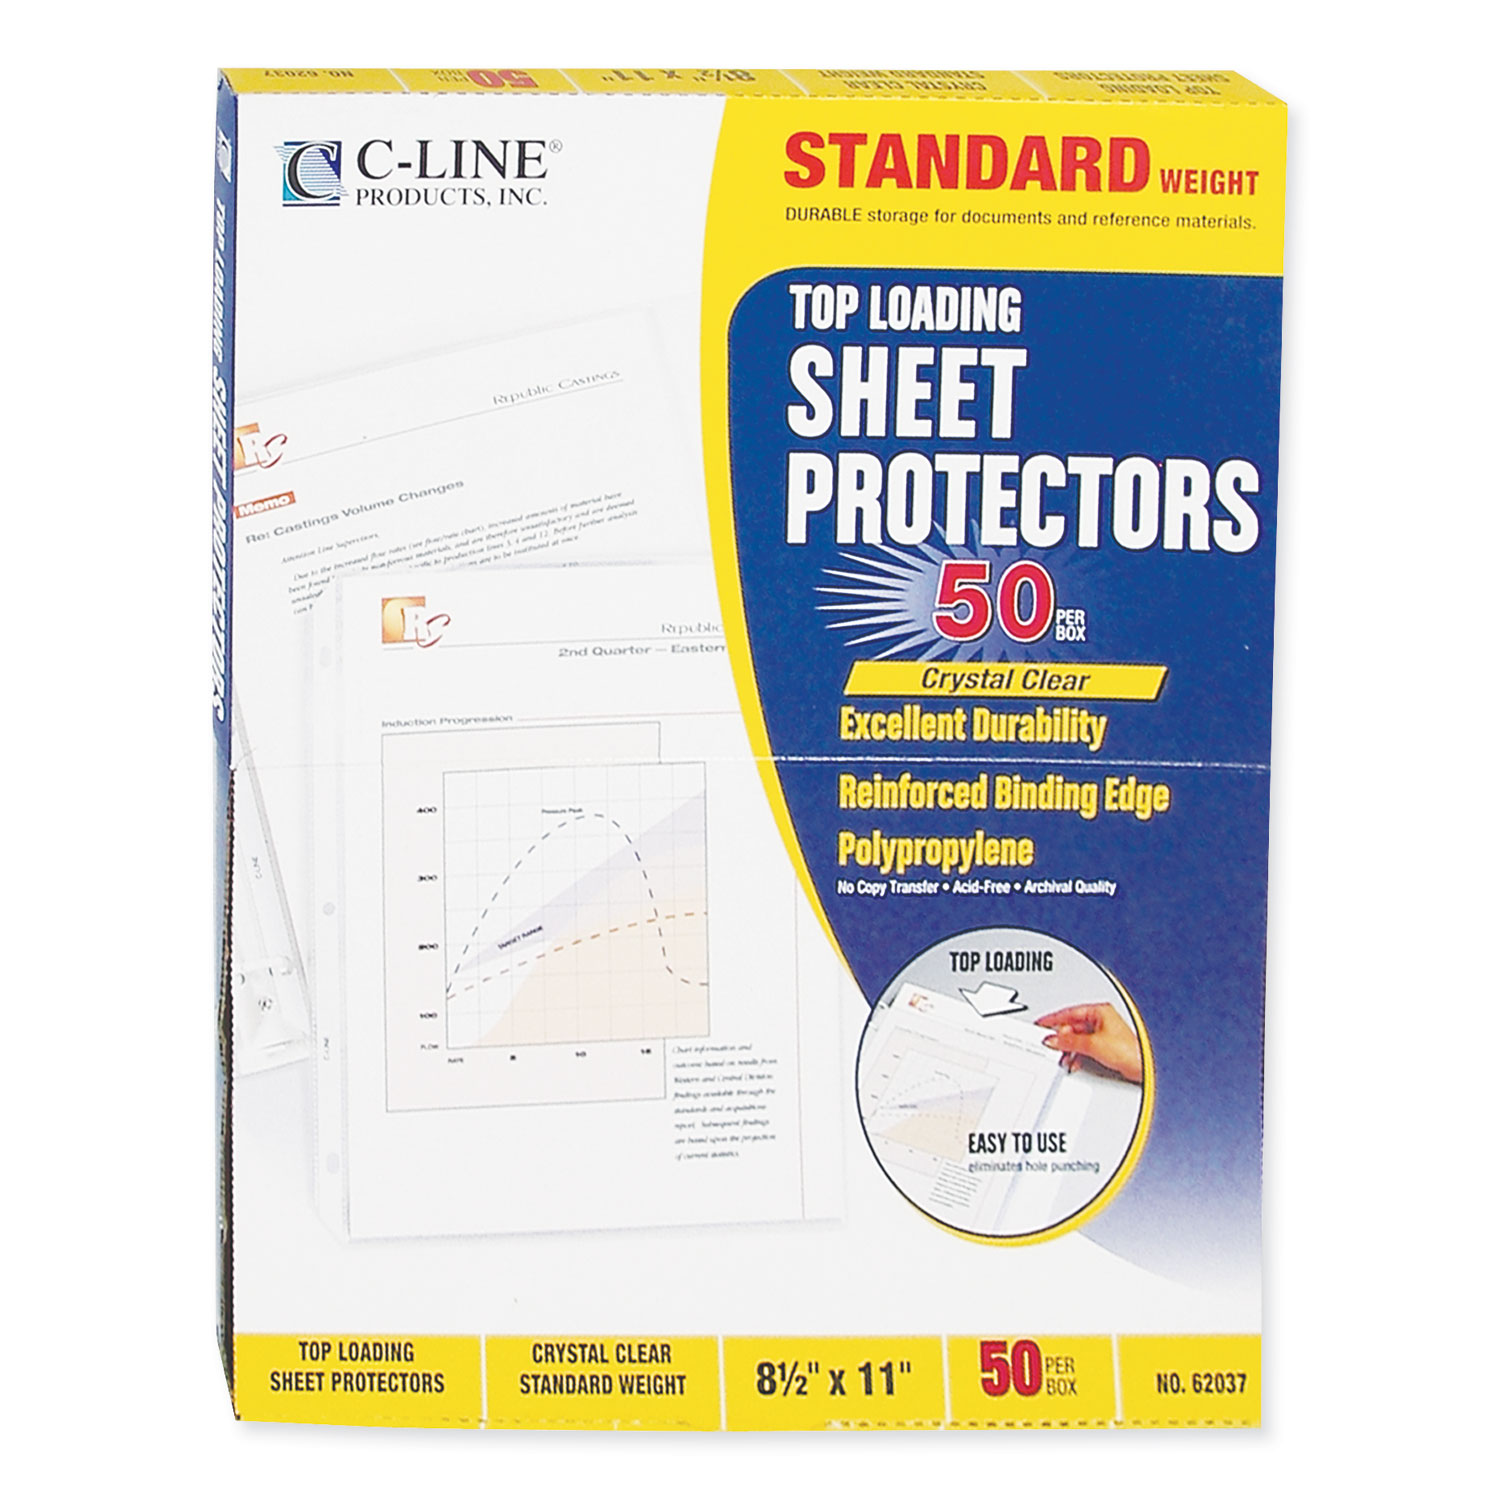 Officewerks Heavy Duty Clear Sheet Protectors - 500 Pack, Refinforced Holes, 8.5 x 11 Inches, Acid Free/archival Safe